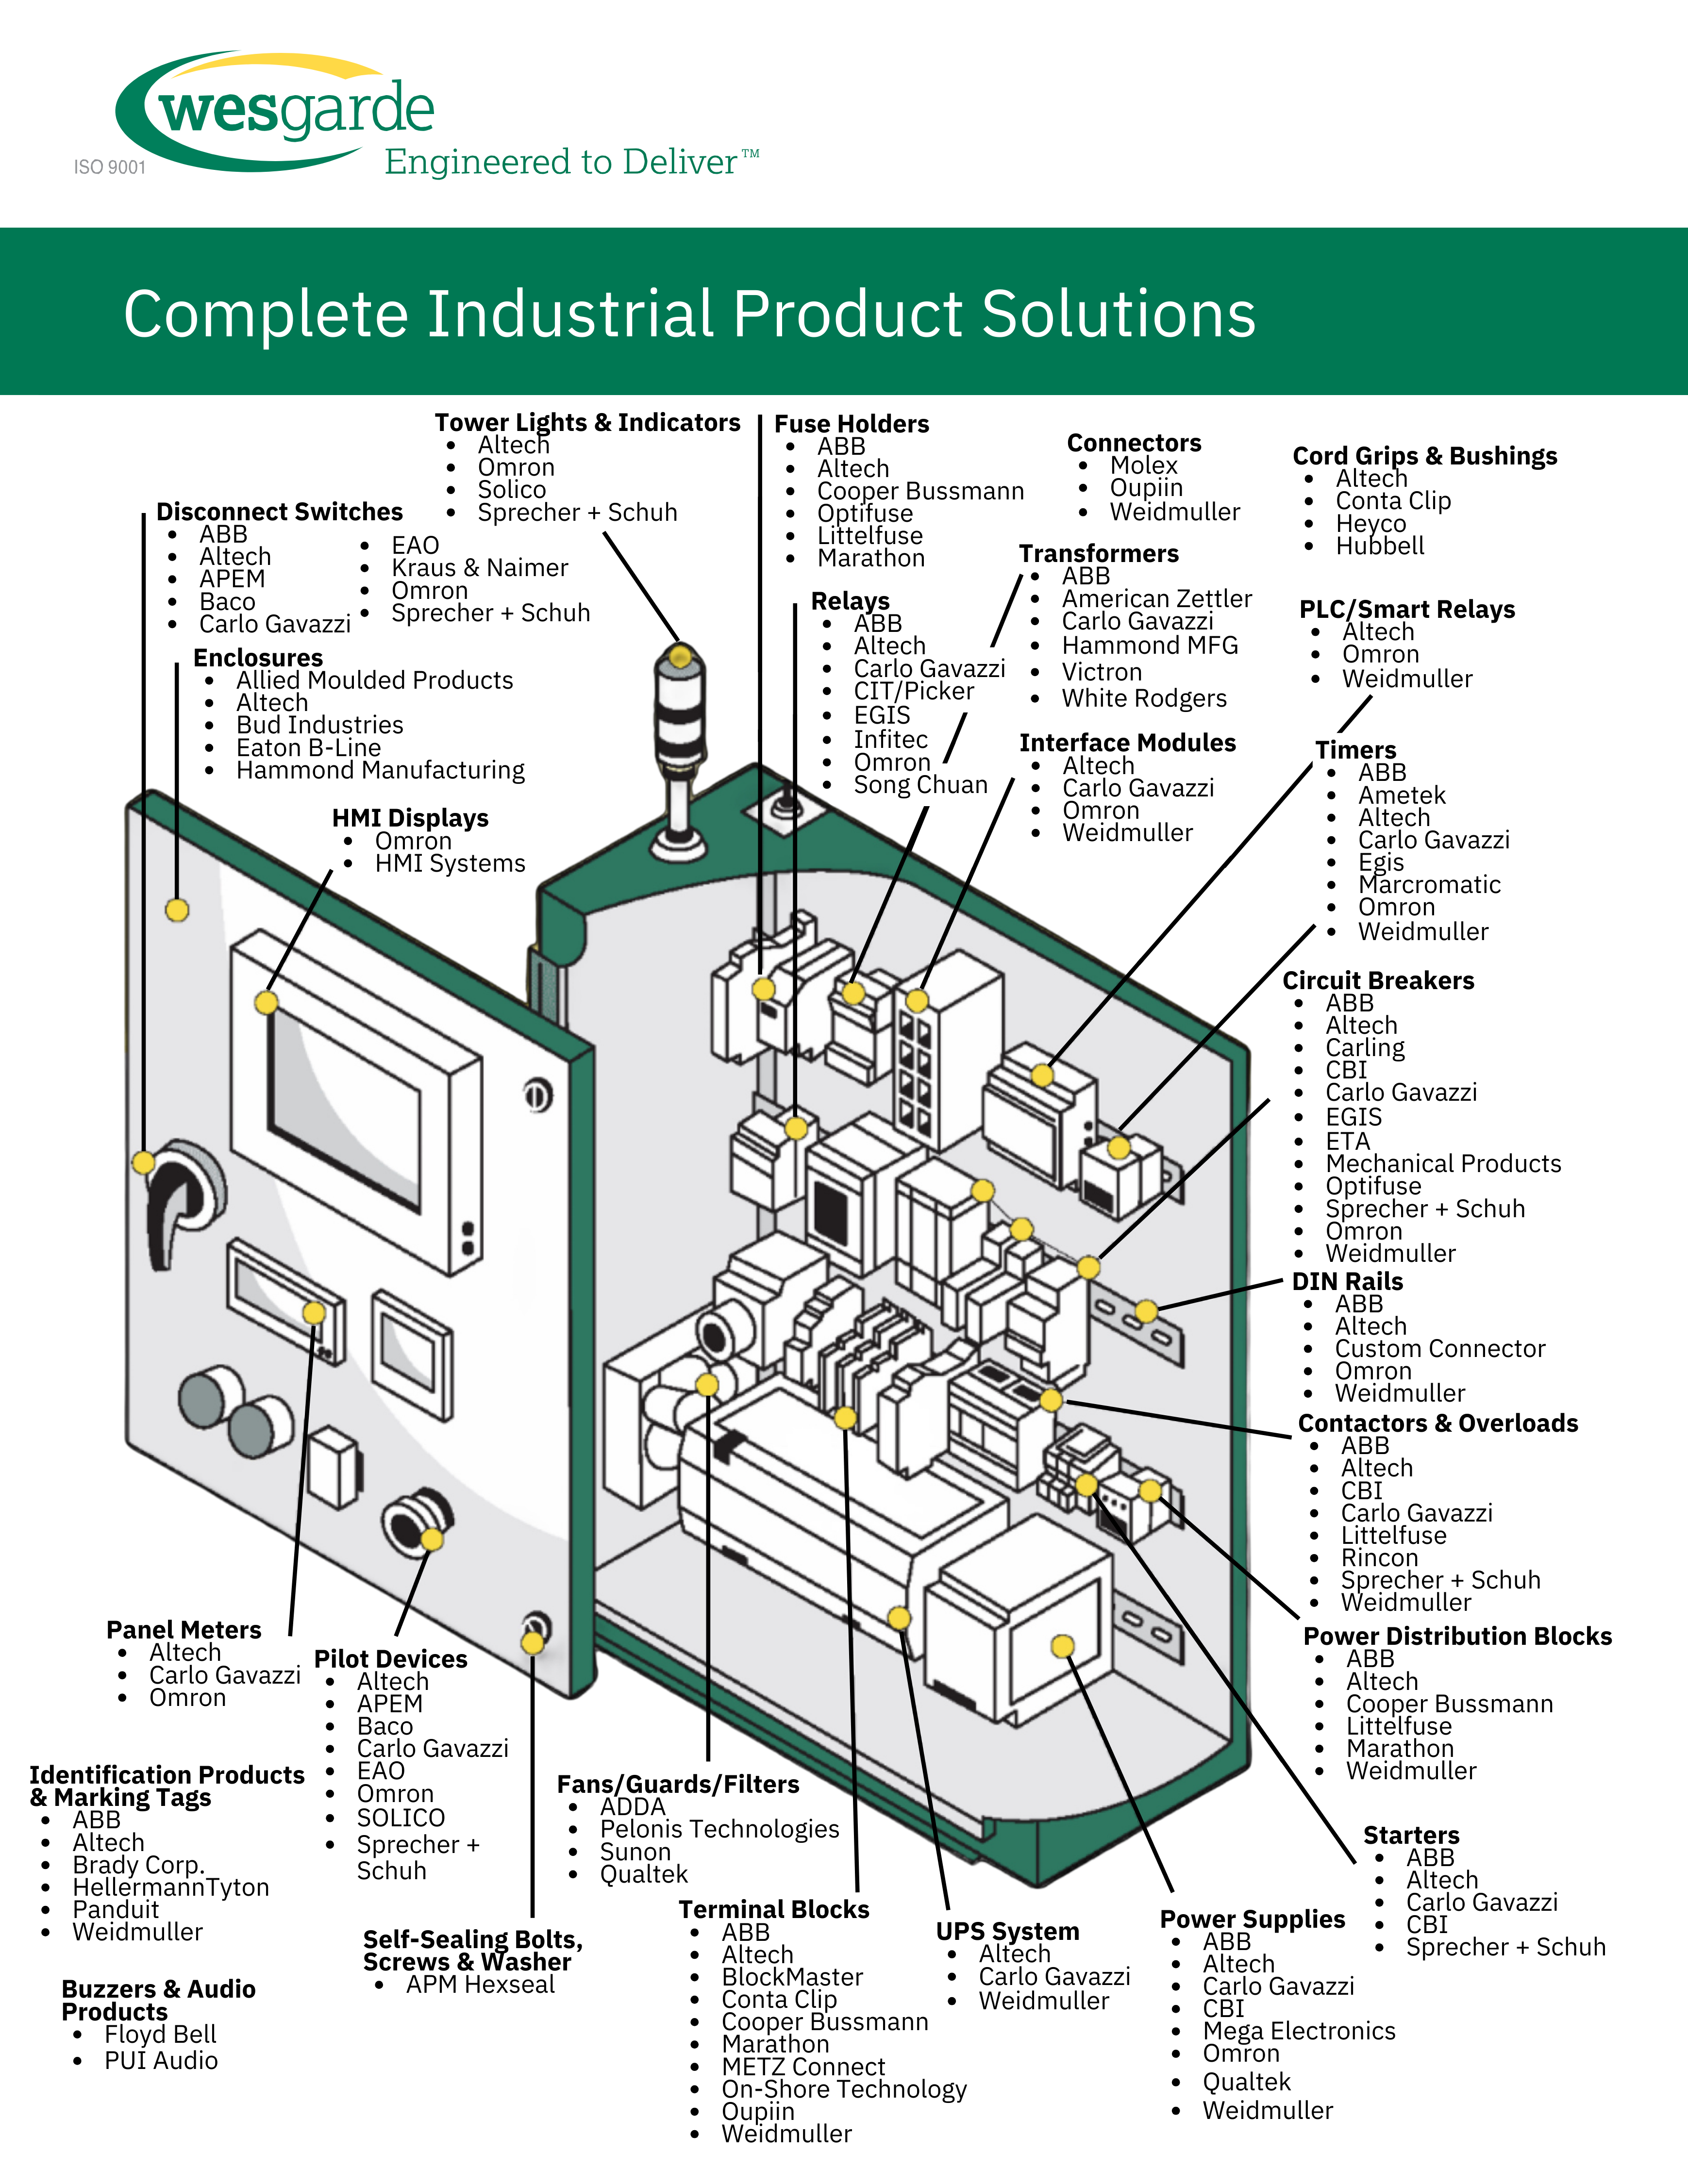 Learn More About Wesgarde's Industrial Solutions